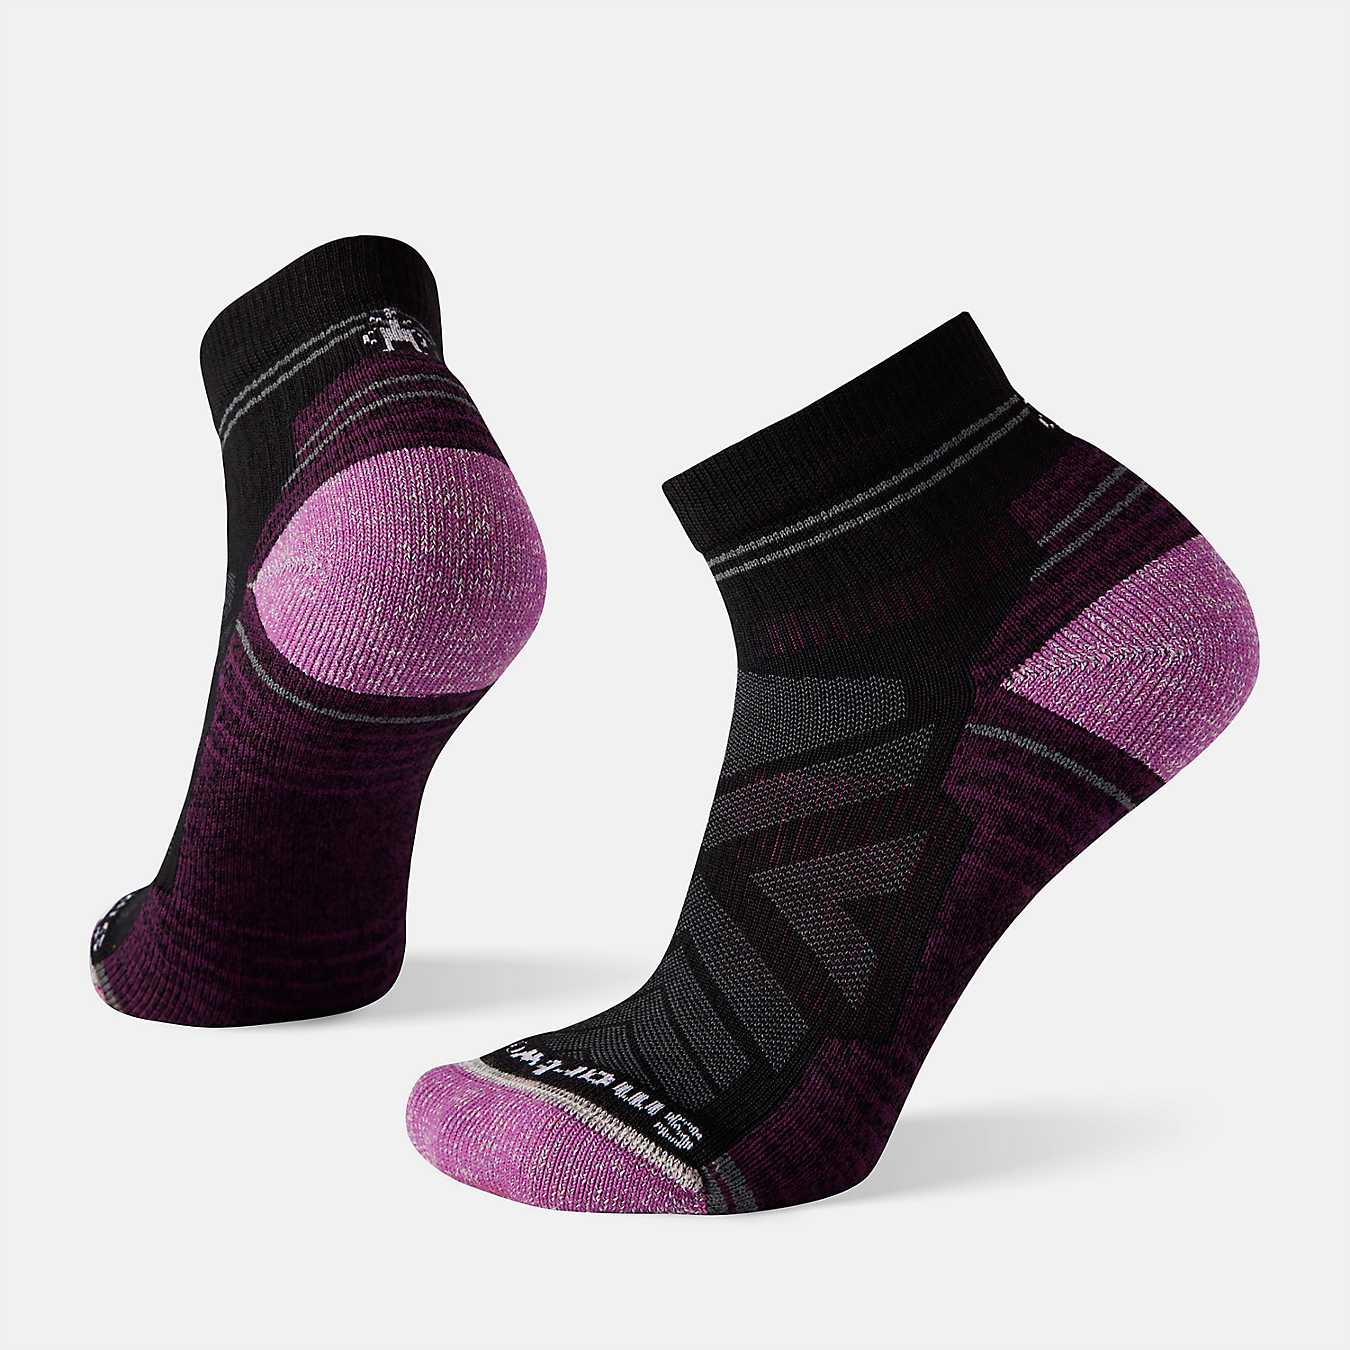 Smartwool Hiking Socks Review: Sustainably Sourced Performance